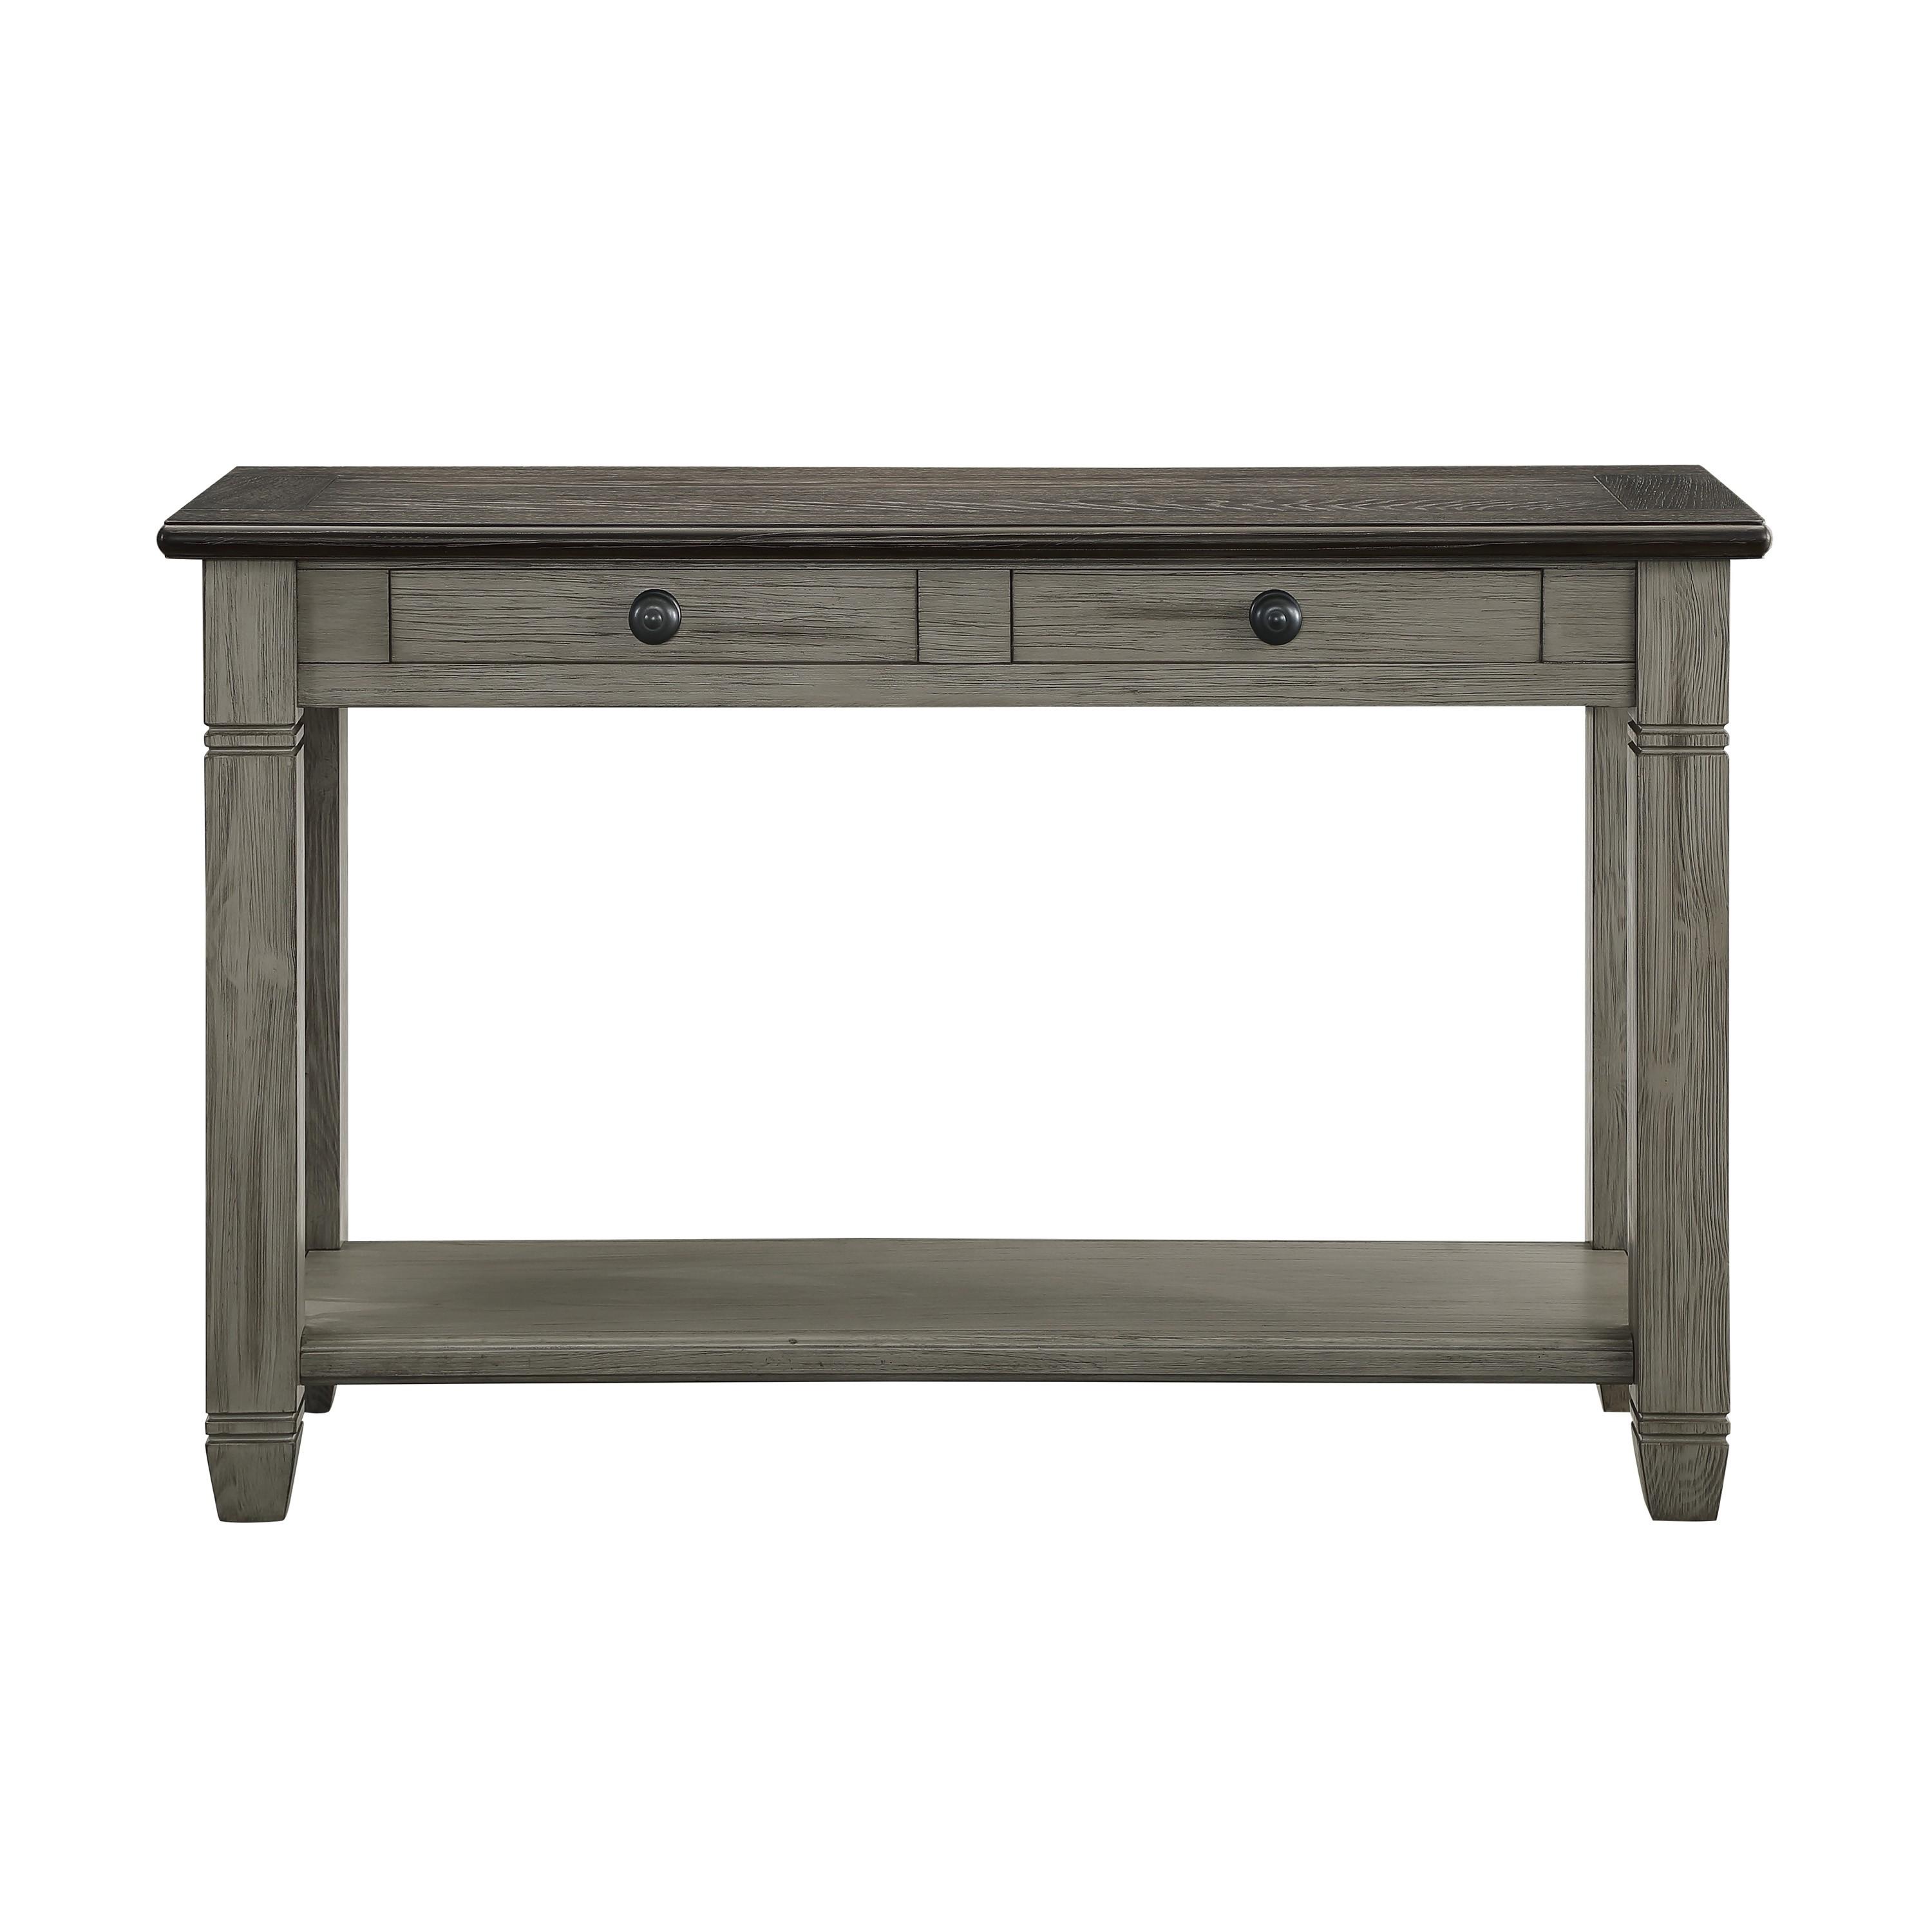 Cottage Sofa Table 5627GY-05 Granby 5627GY-05 in Gray, Coffee 